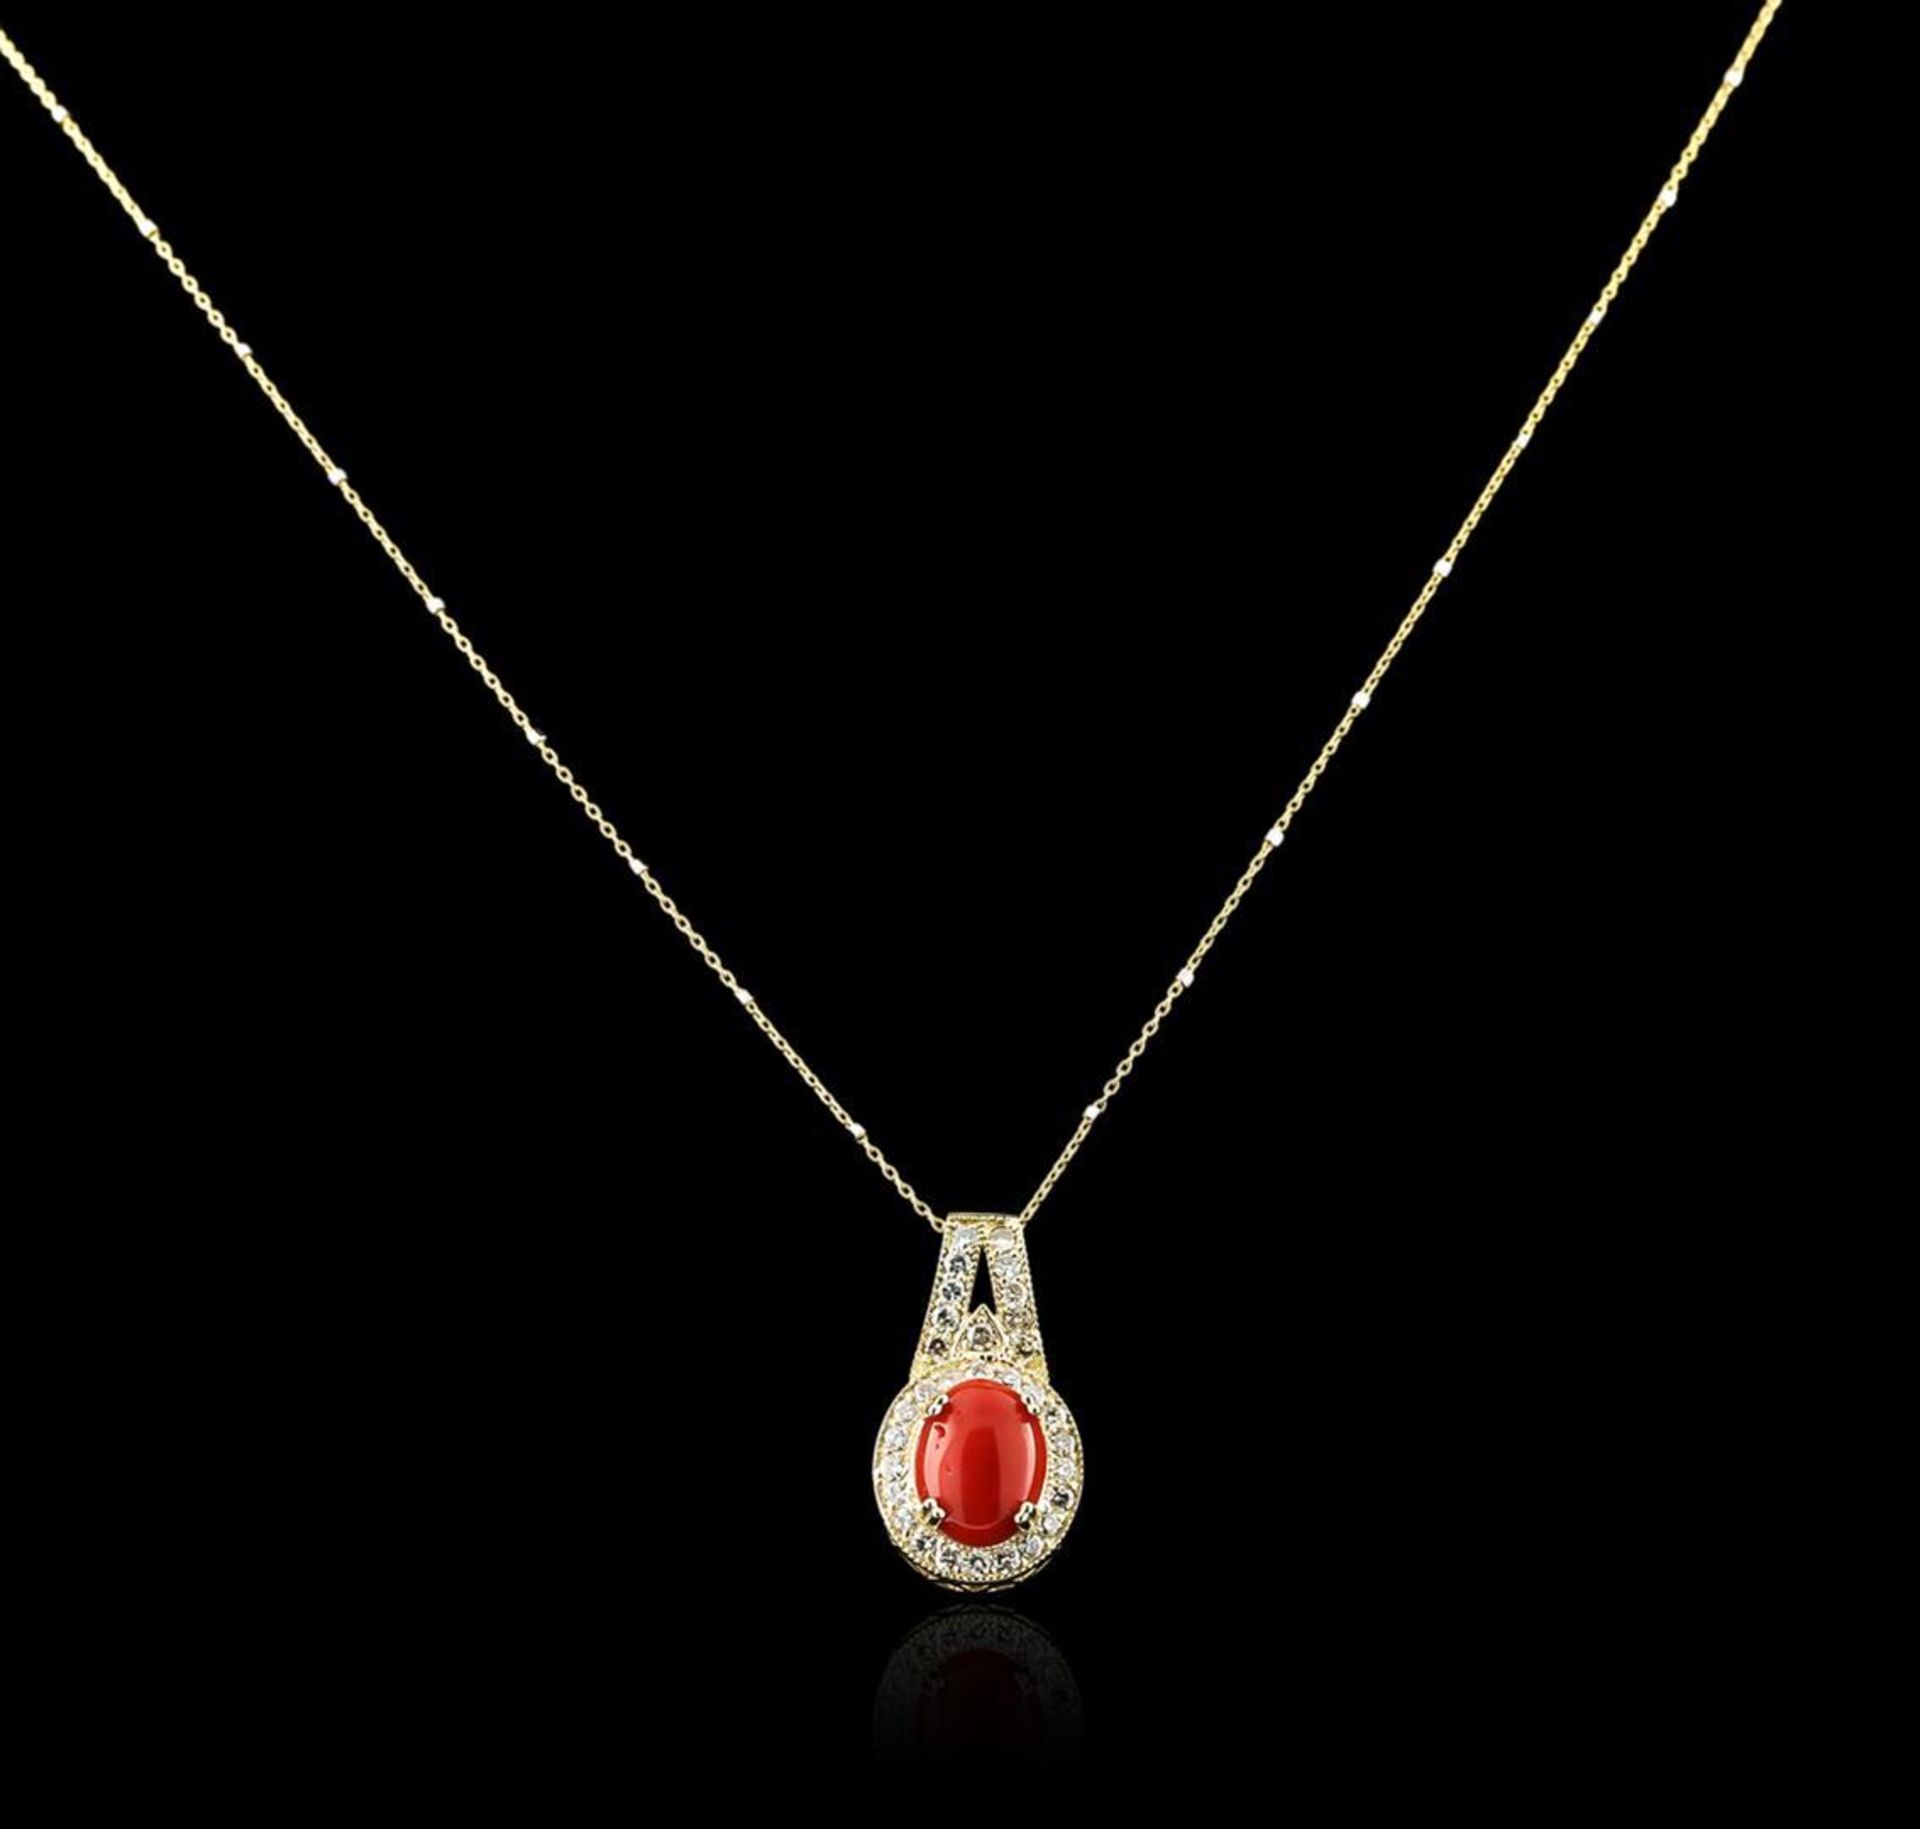 14KT Yellow Gold 6.16 ctw Coral and Diamond Pendant With Chain - Image 2 of 3